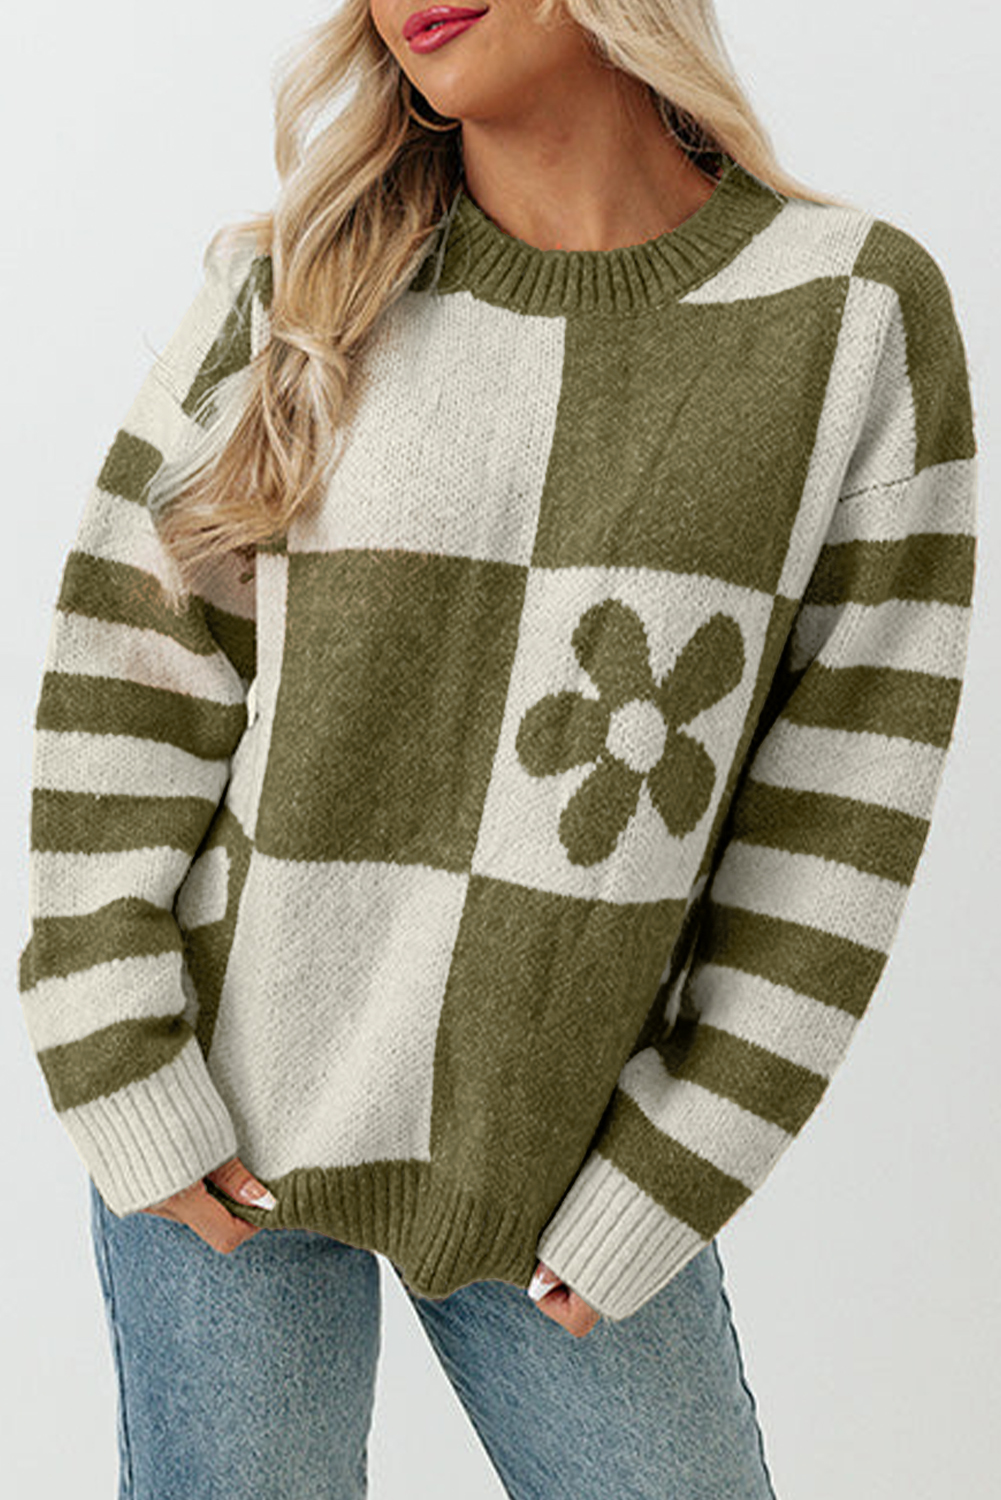 Shewin Wholesale Southern Mist Green Checkered and Striped Knitted Pullover SWEATER